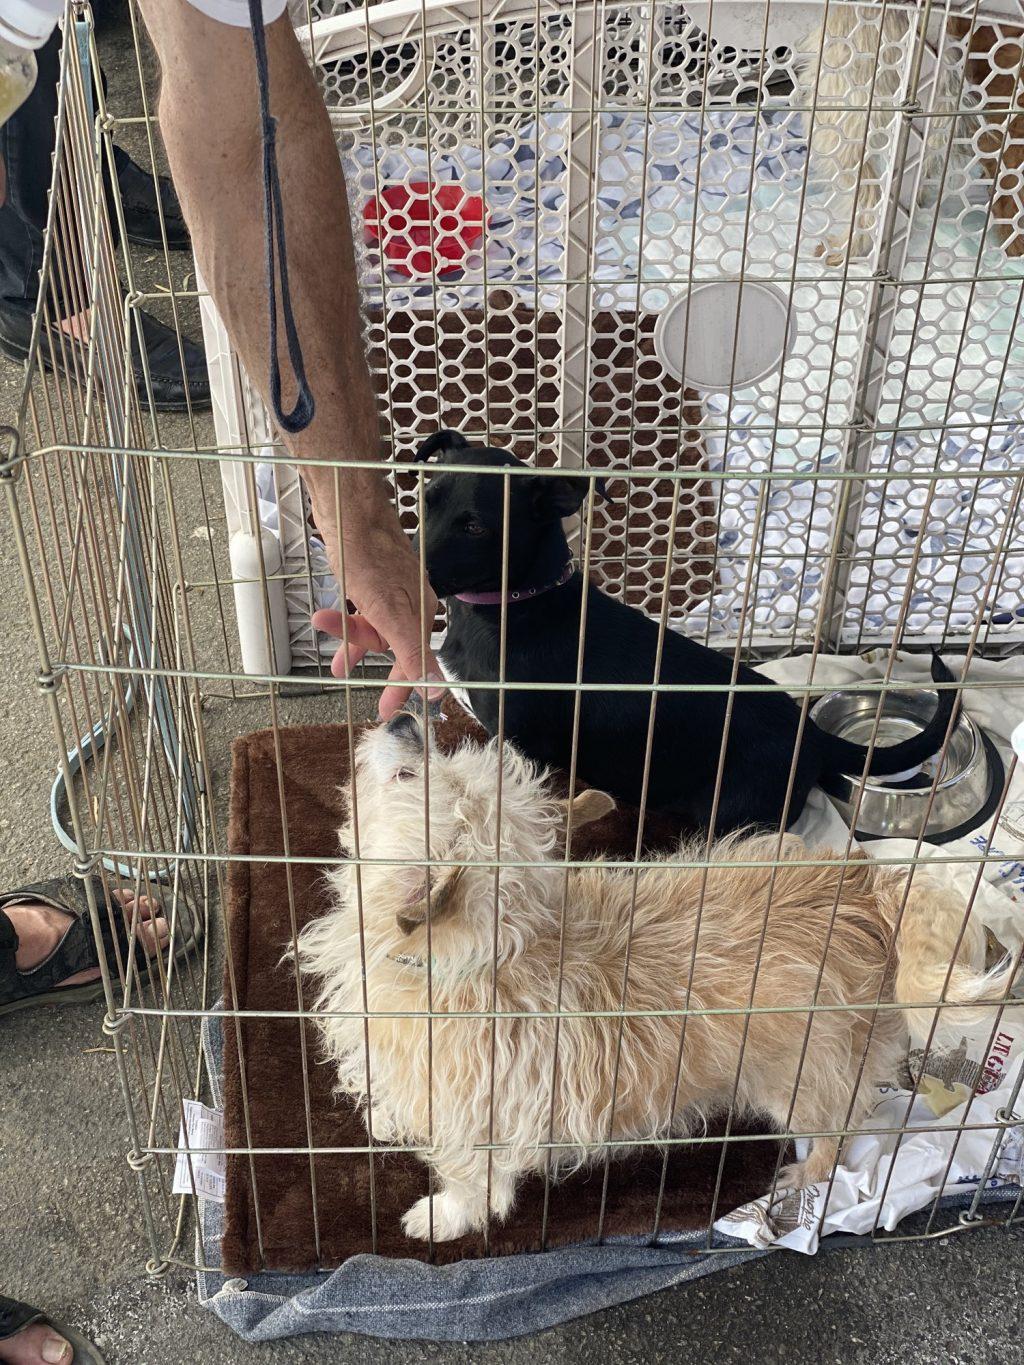 Co-founder Ed Alexander reaches down to pet the dogs inside their cages. Signs were posted outside of the cages with a description of each dog for those interested in adopting to read.